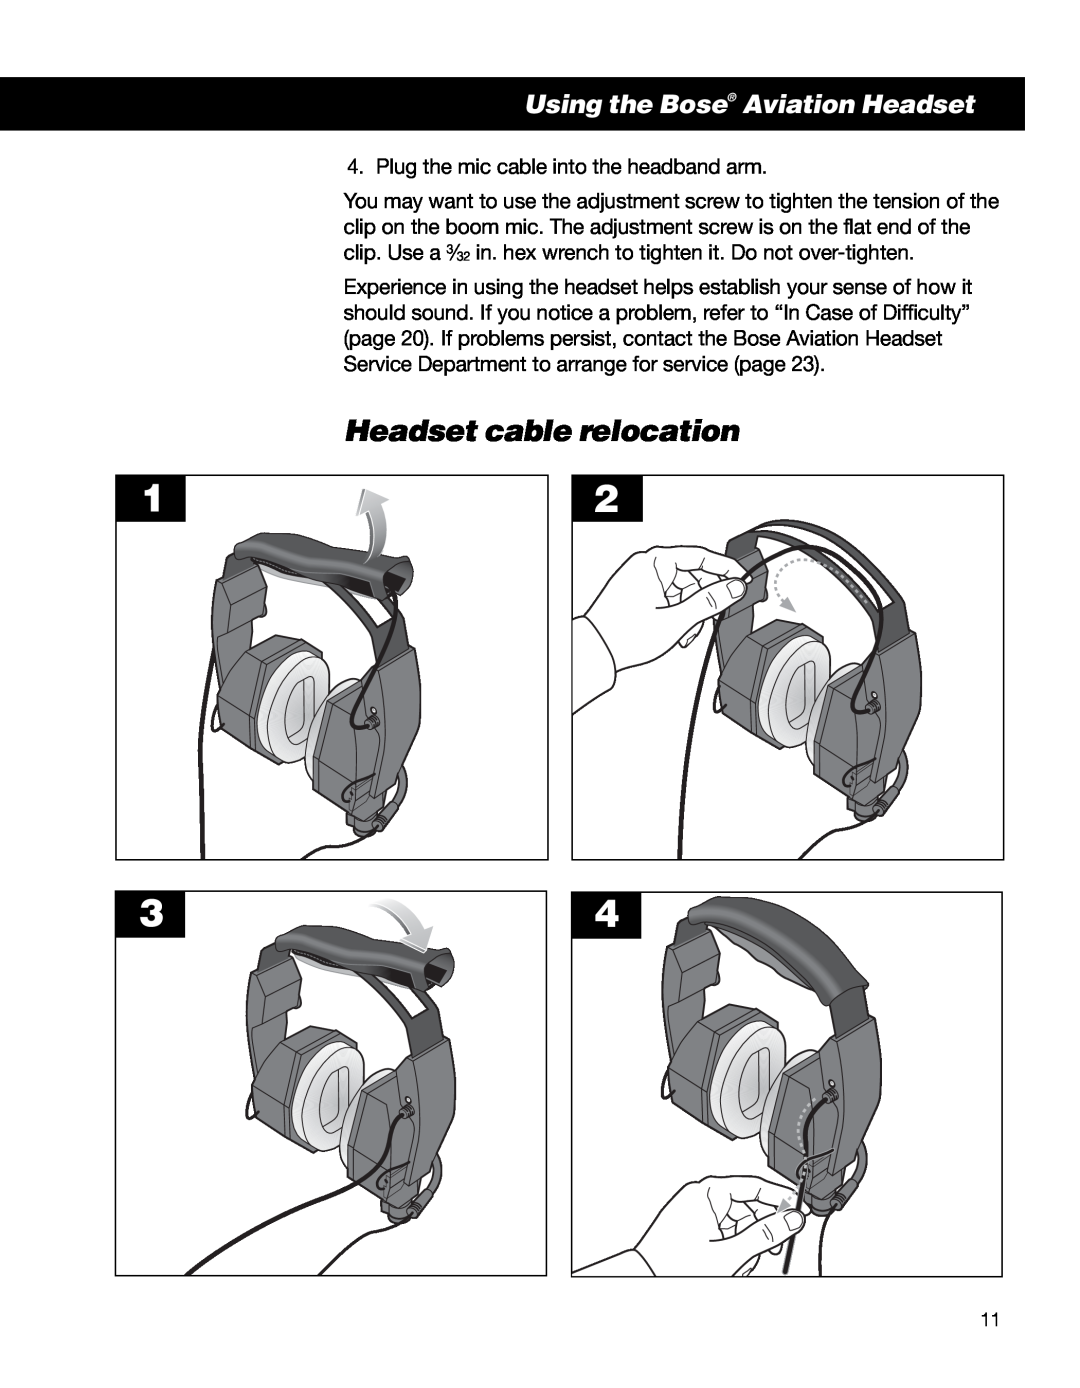 Bose II manual Headset cable relocation, Using the Bose Aviation Headset 